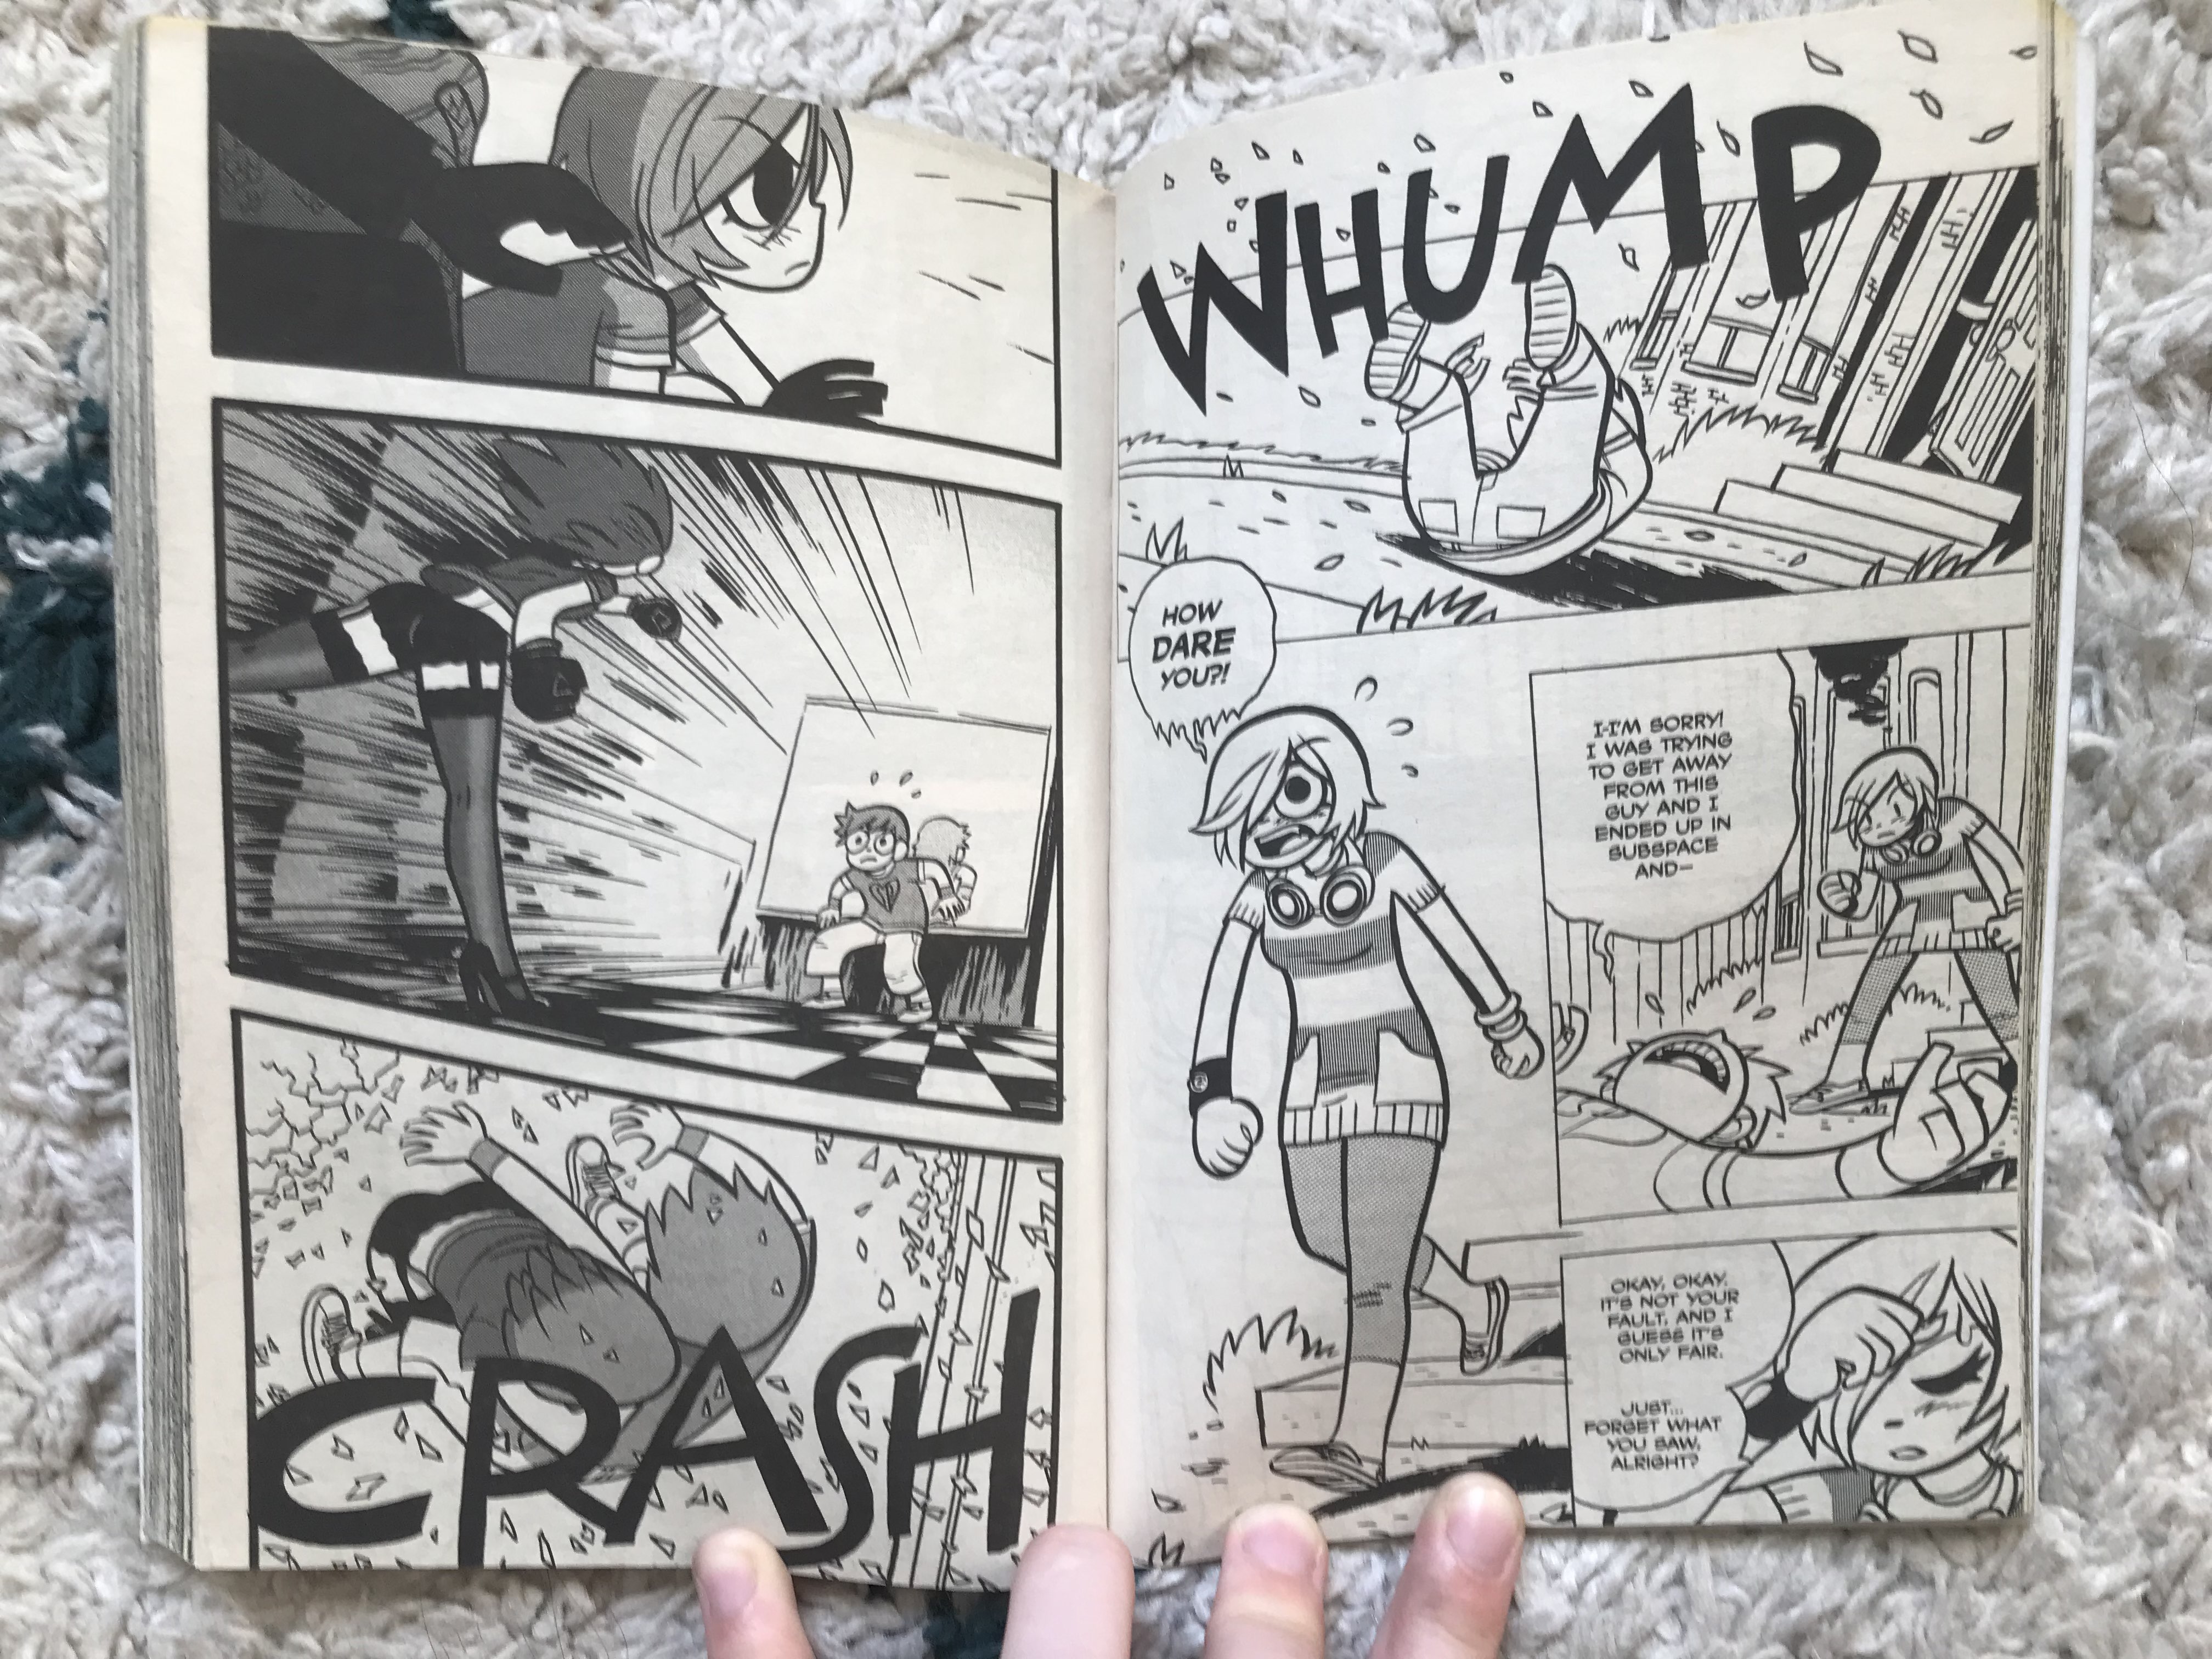 A photo of two pages from the Scott Pilgrim comic books, showing a less condensed panel layout for a slower pace 